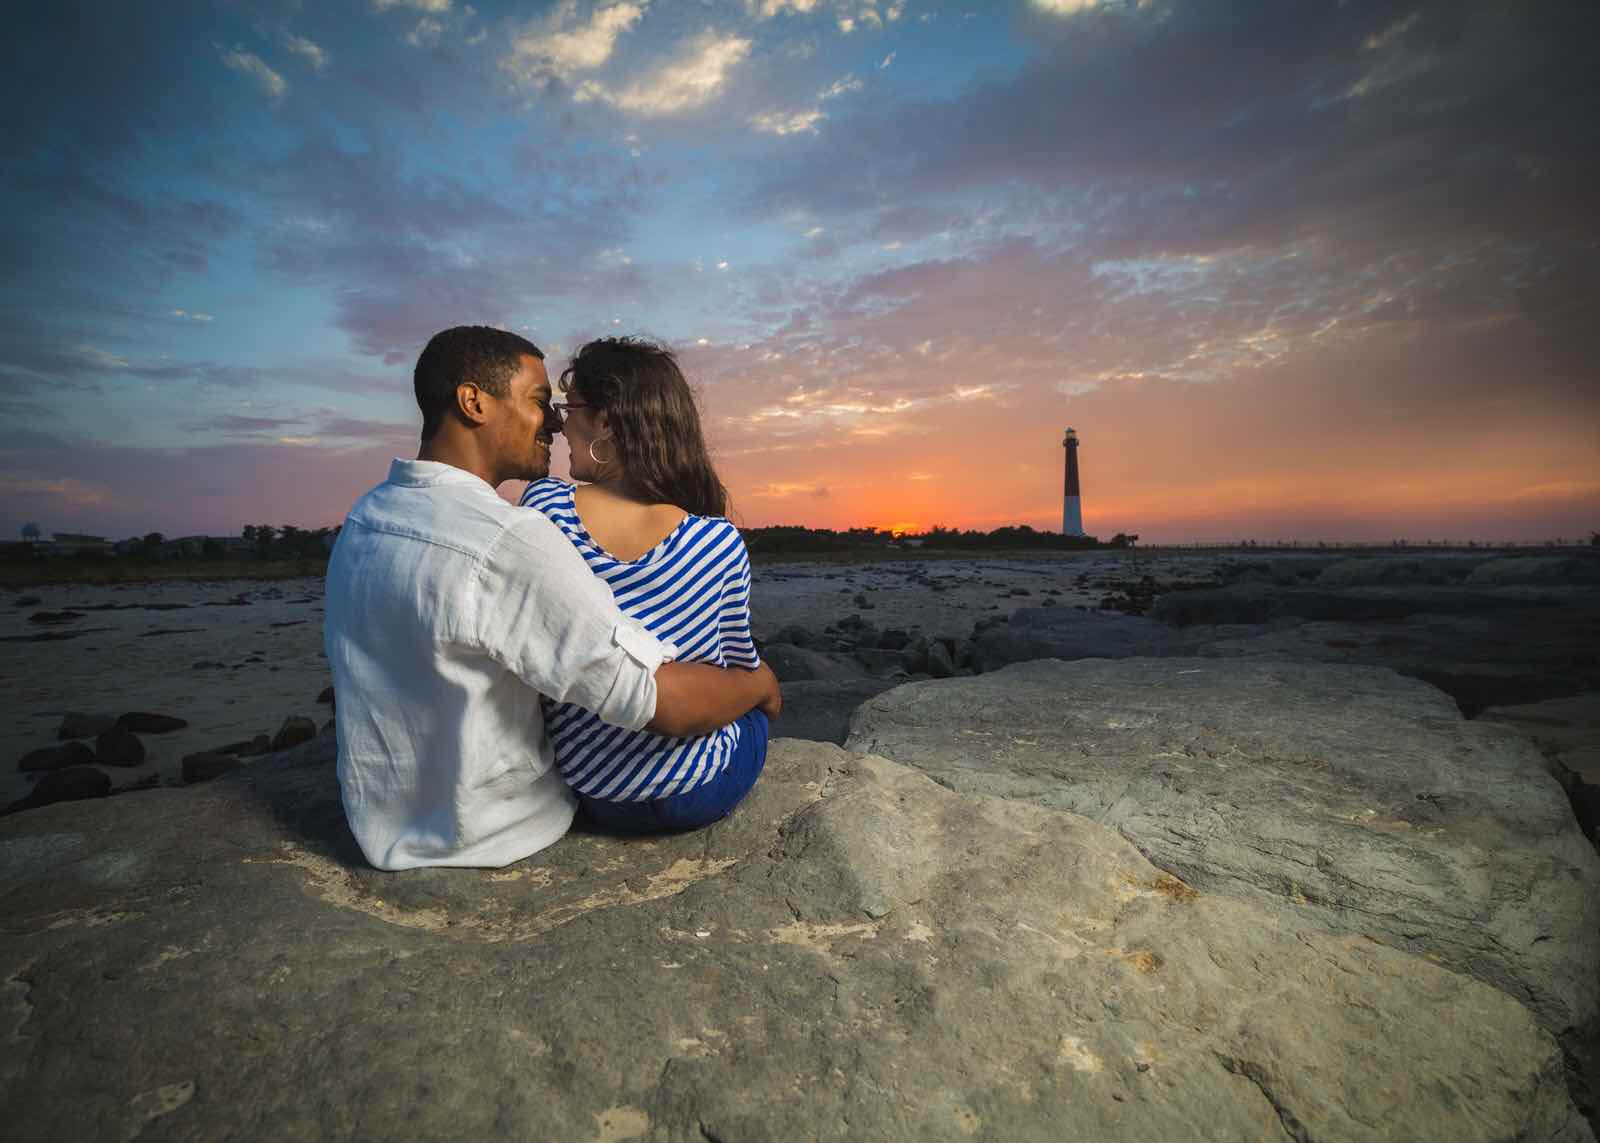 A magical sunset for Deanna and Georges engagement session in Barnagat Light, NJ